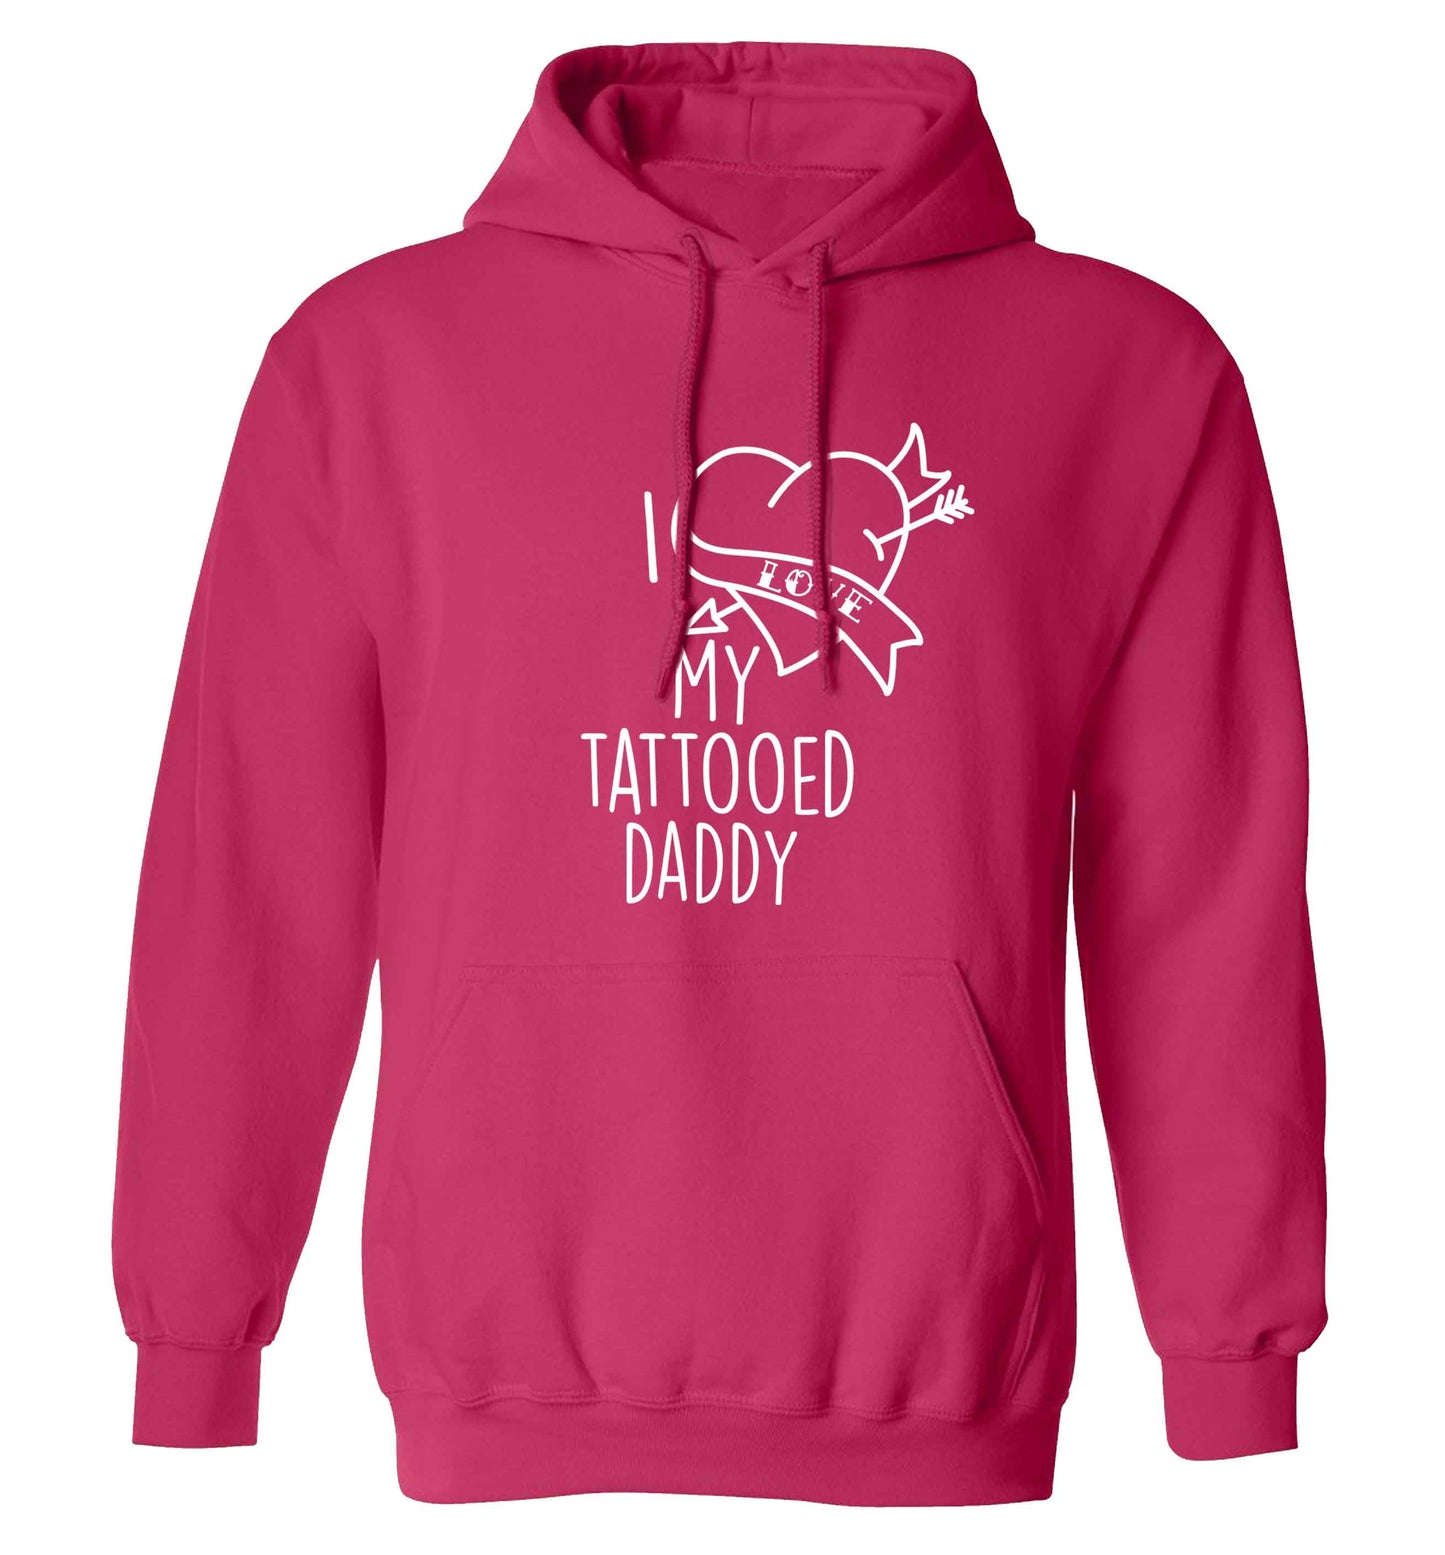 I love my tattooed daddy adults unisex pink hoodie 2XL